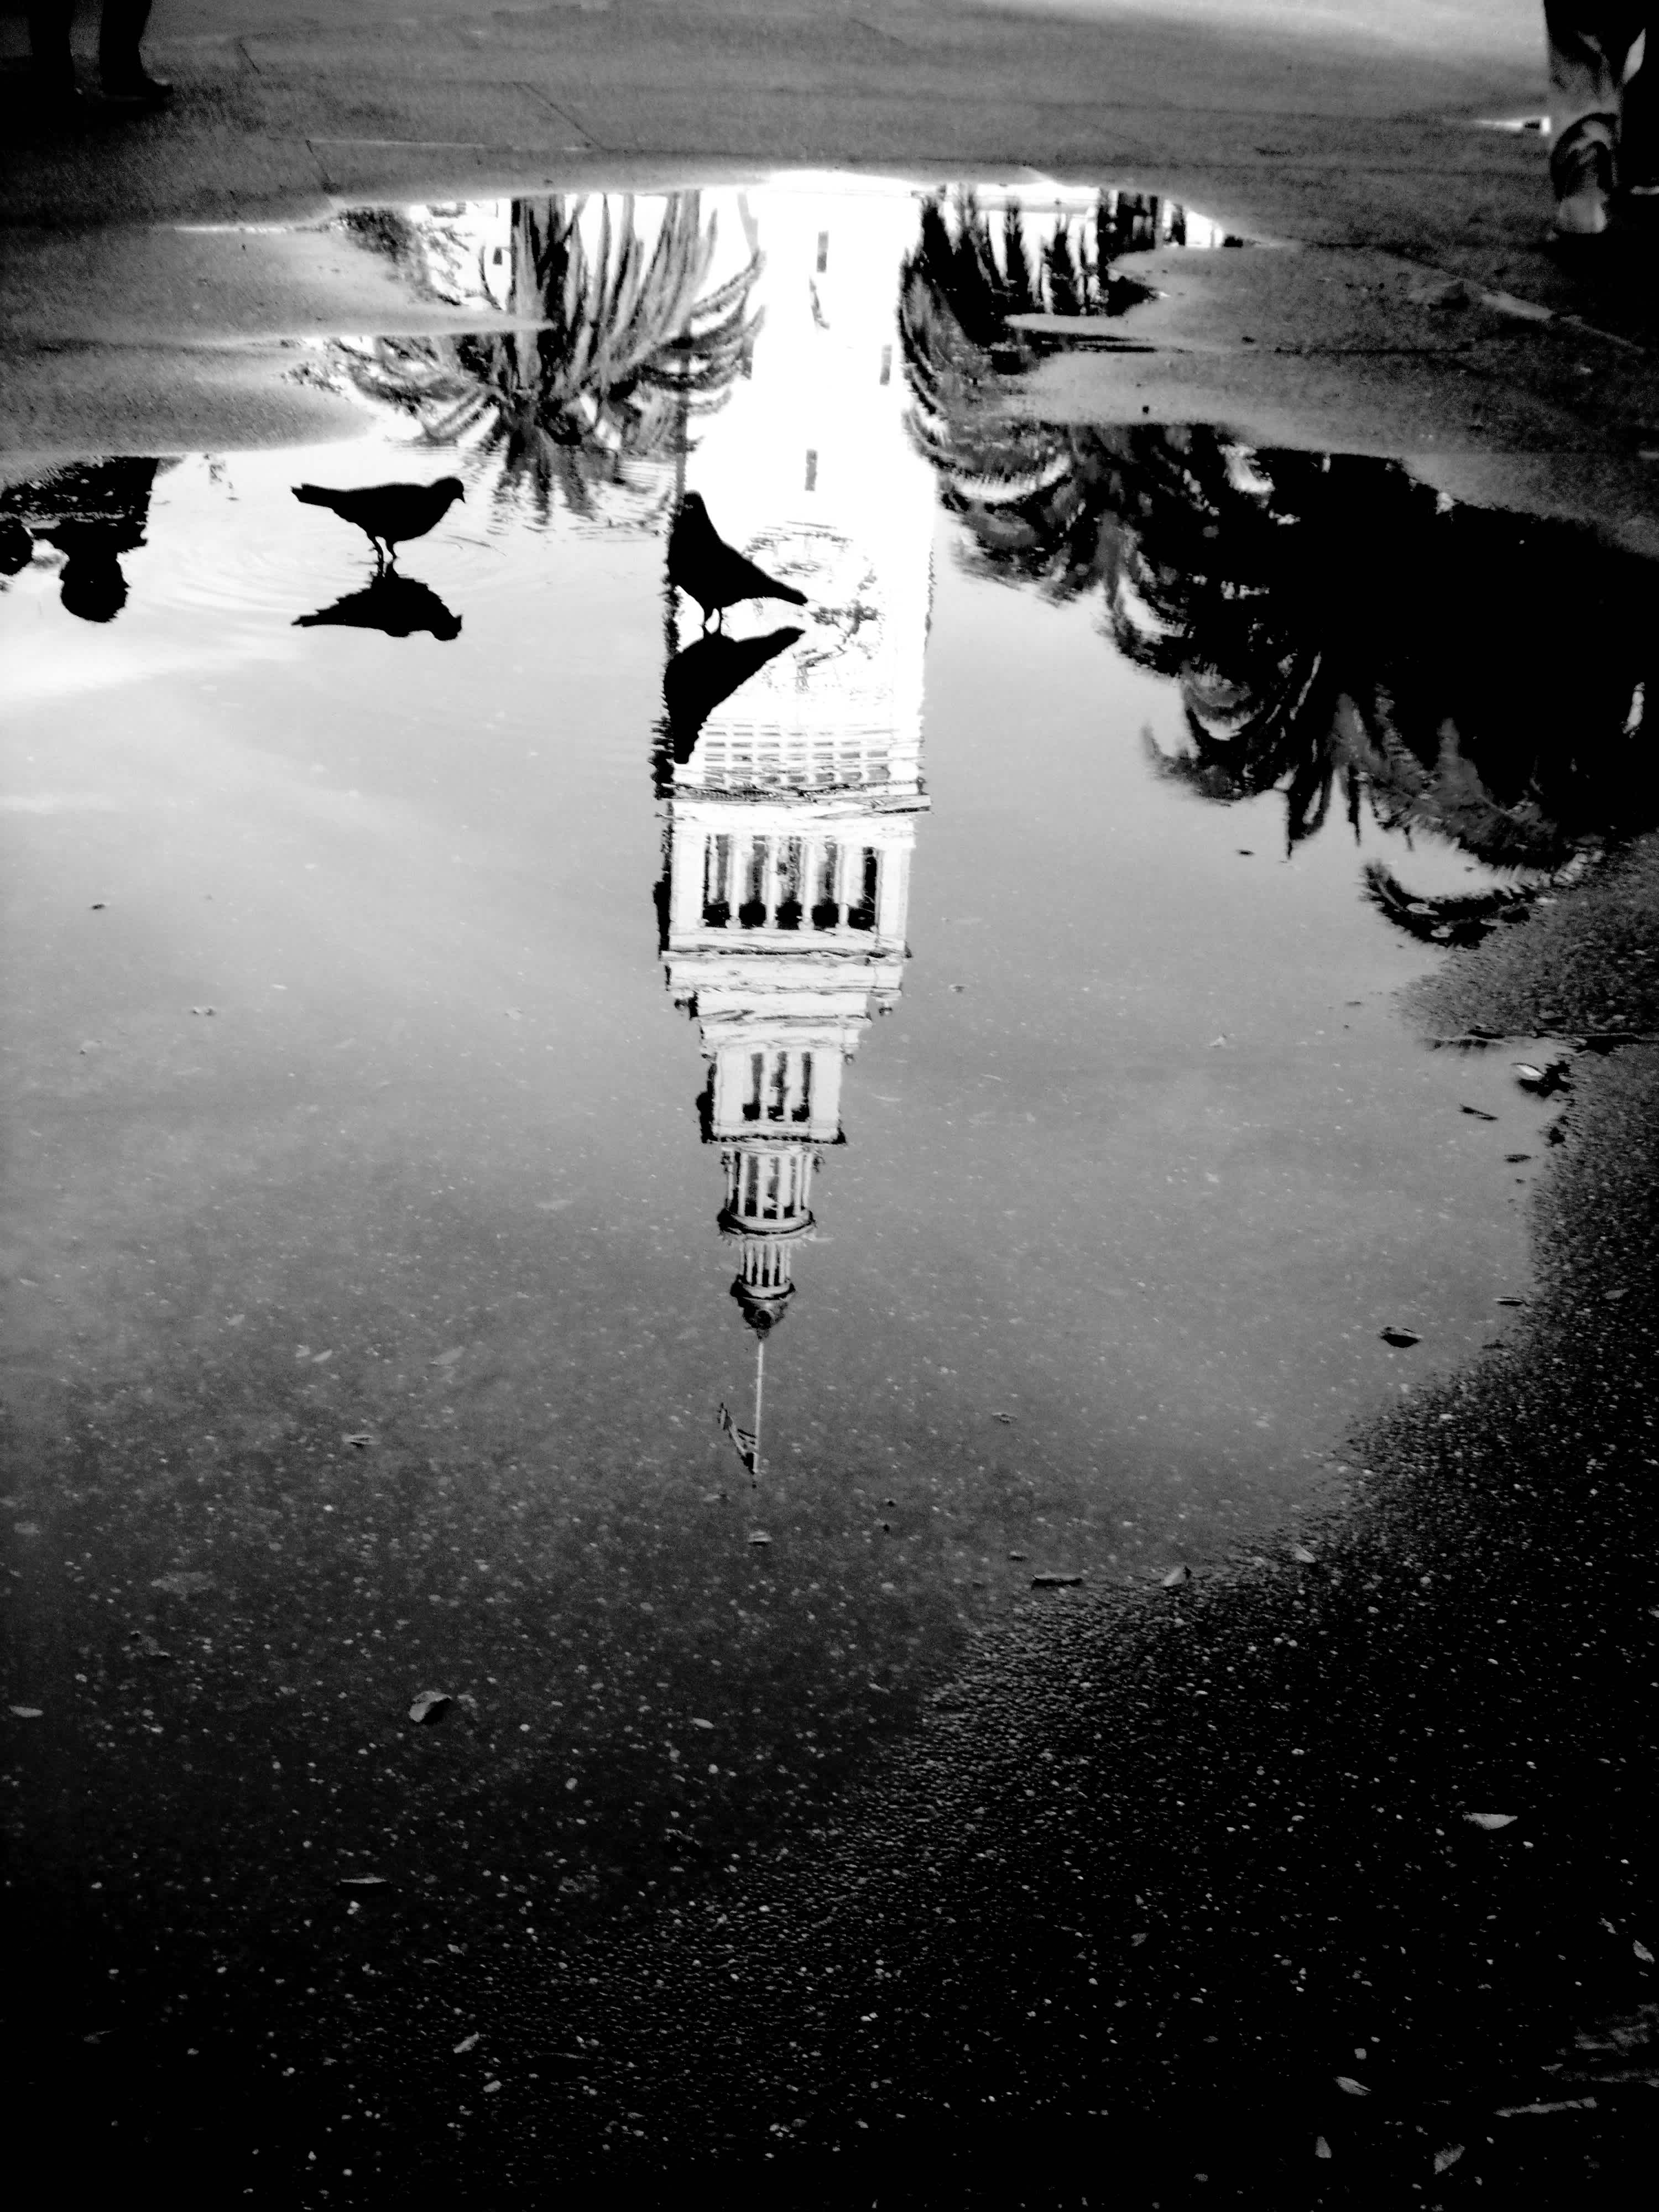 Clocktower reflected in a puddle of water in black and white in Ferry Building, San Francisco, California. 